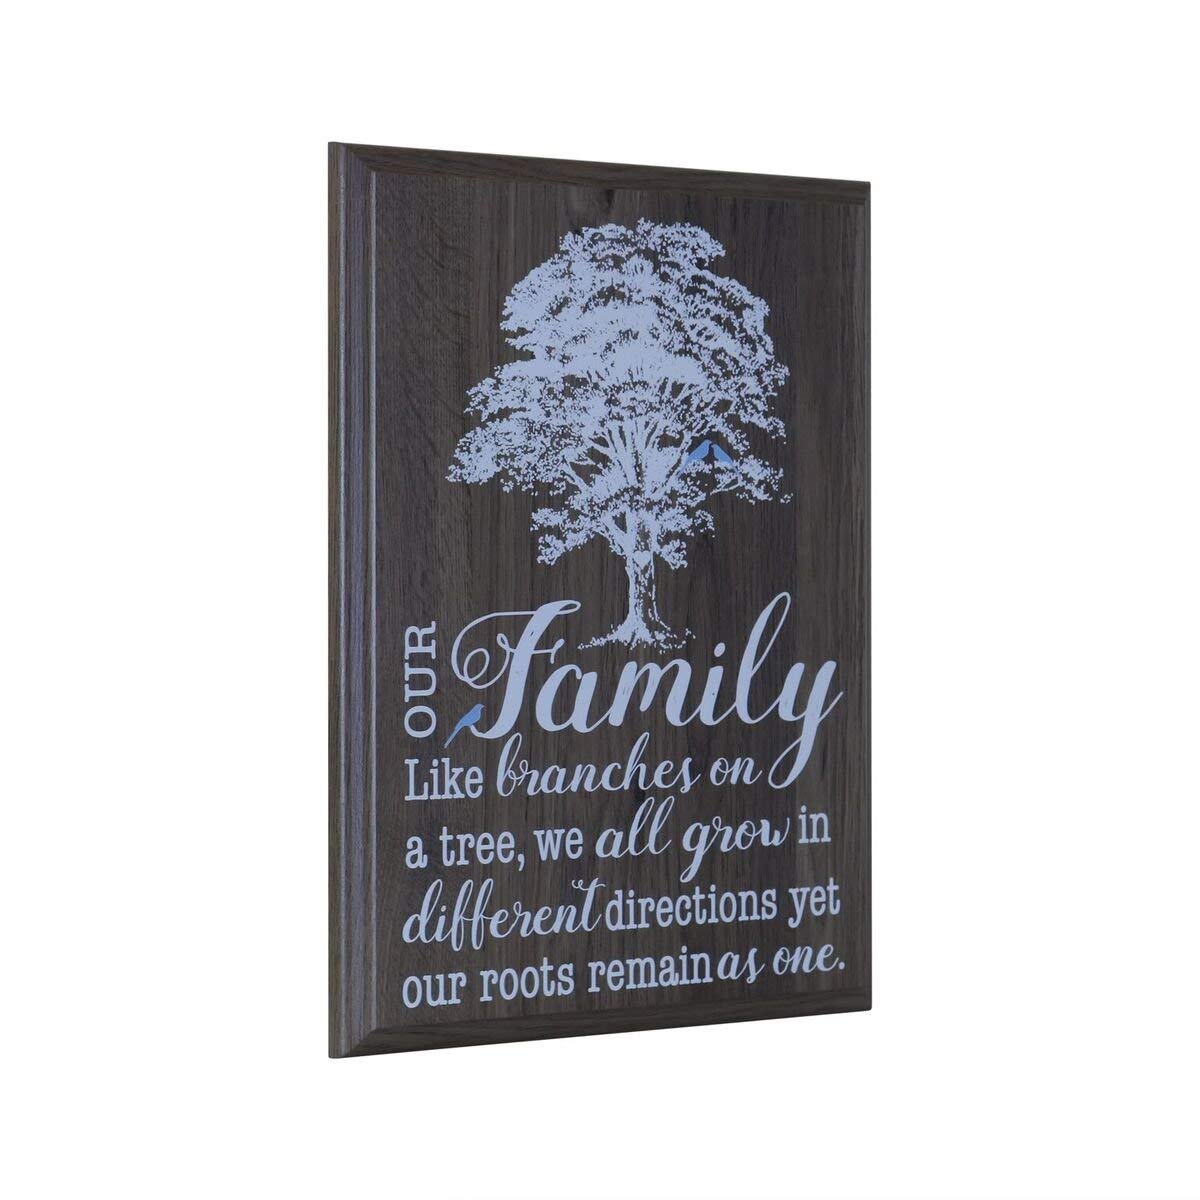 12 x 15 Wall Plaque Decor - Our Family - LifeSong Milestones